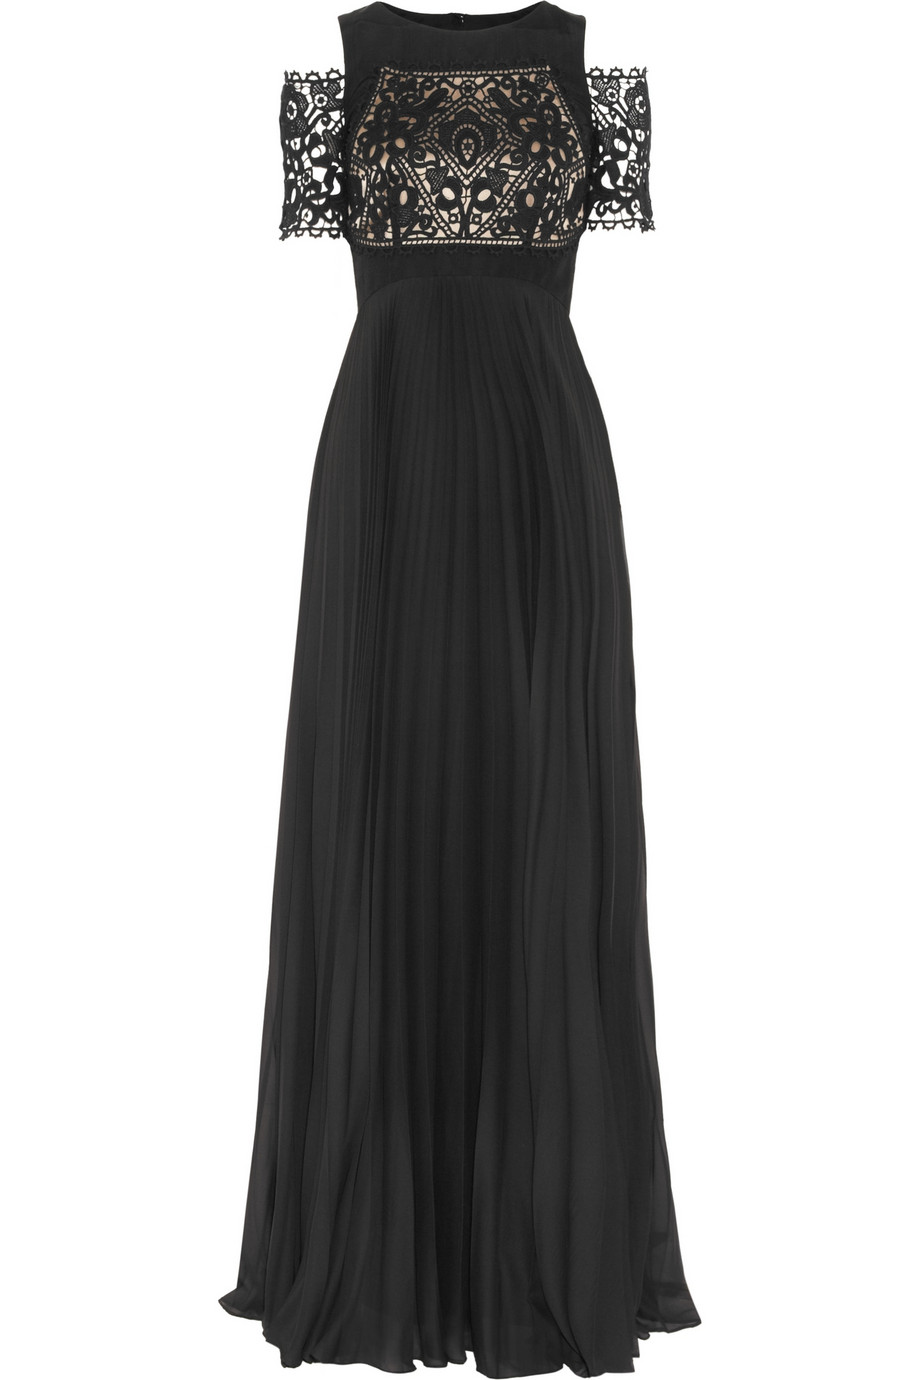 Lyst - Temperley london Catherine Lace and Pleated Chiffon Gown in Black